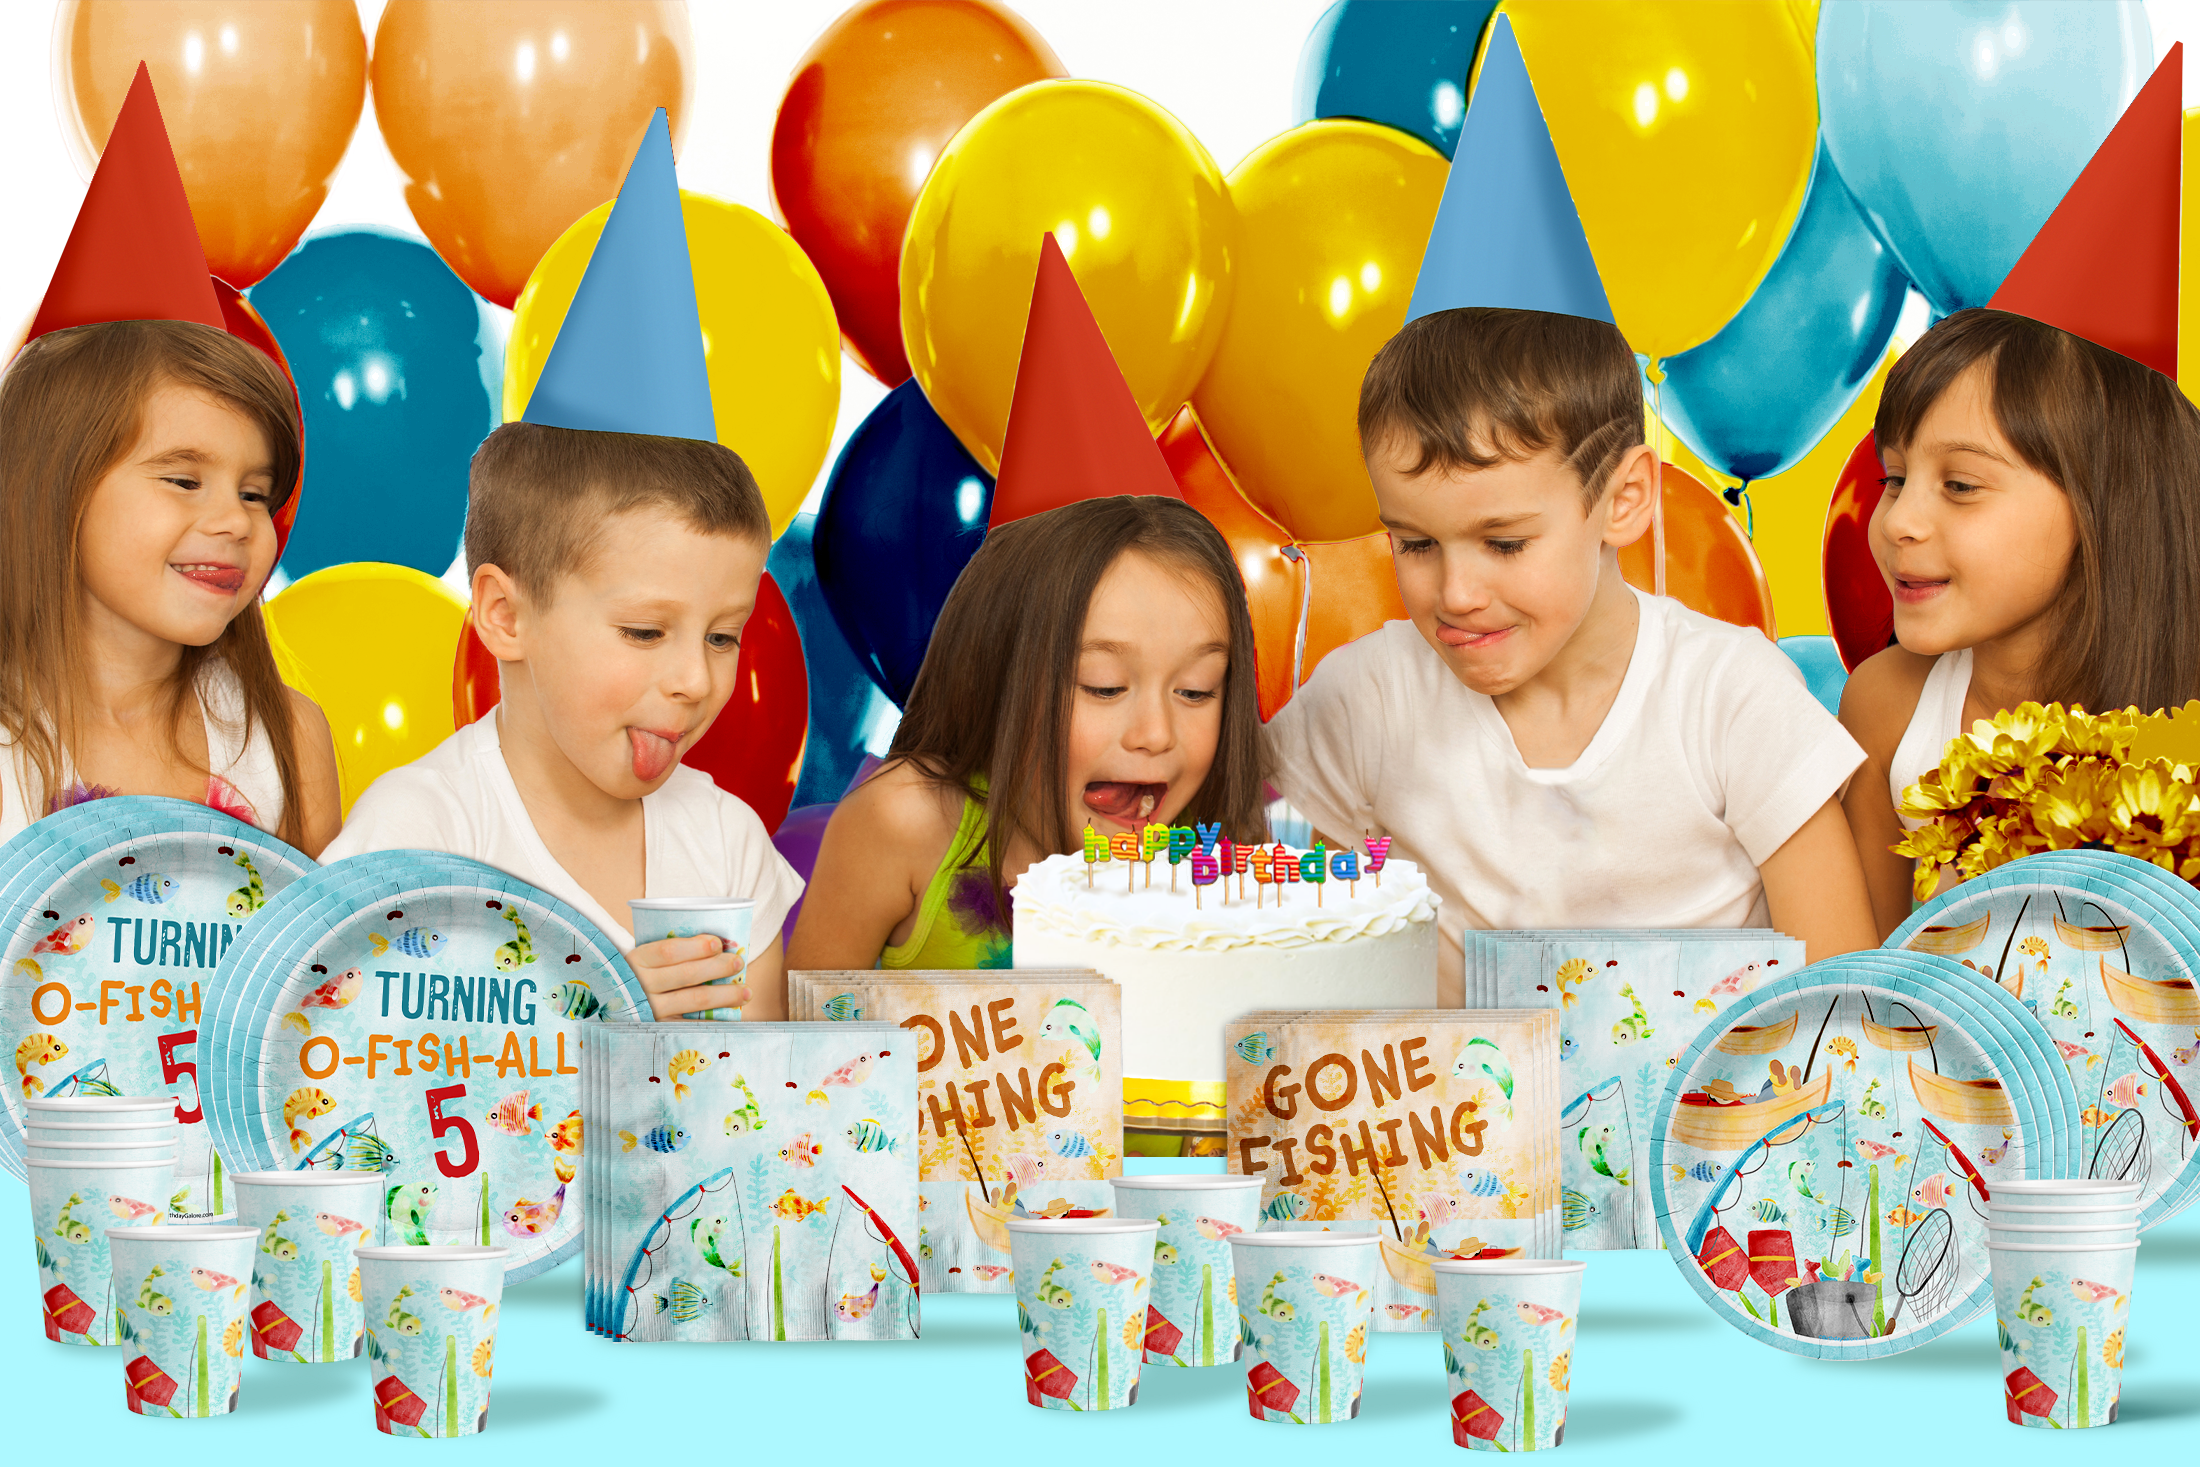 O-fish-ally Five Little Fisherman's 5th Birthday Party Kit